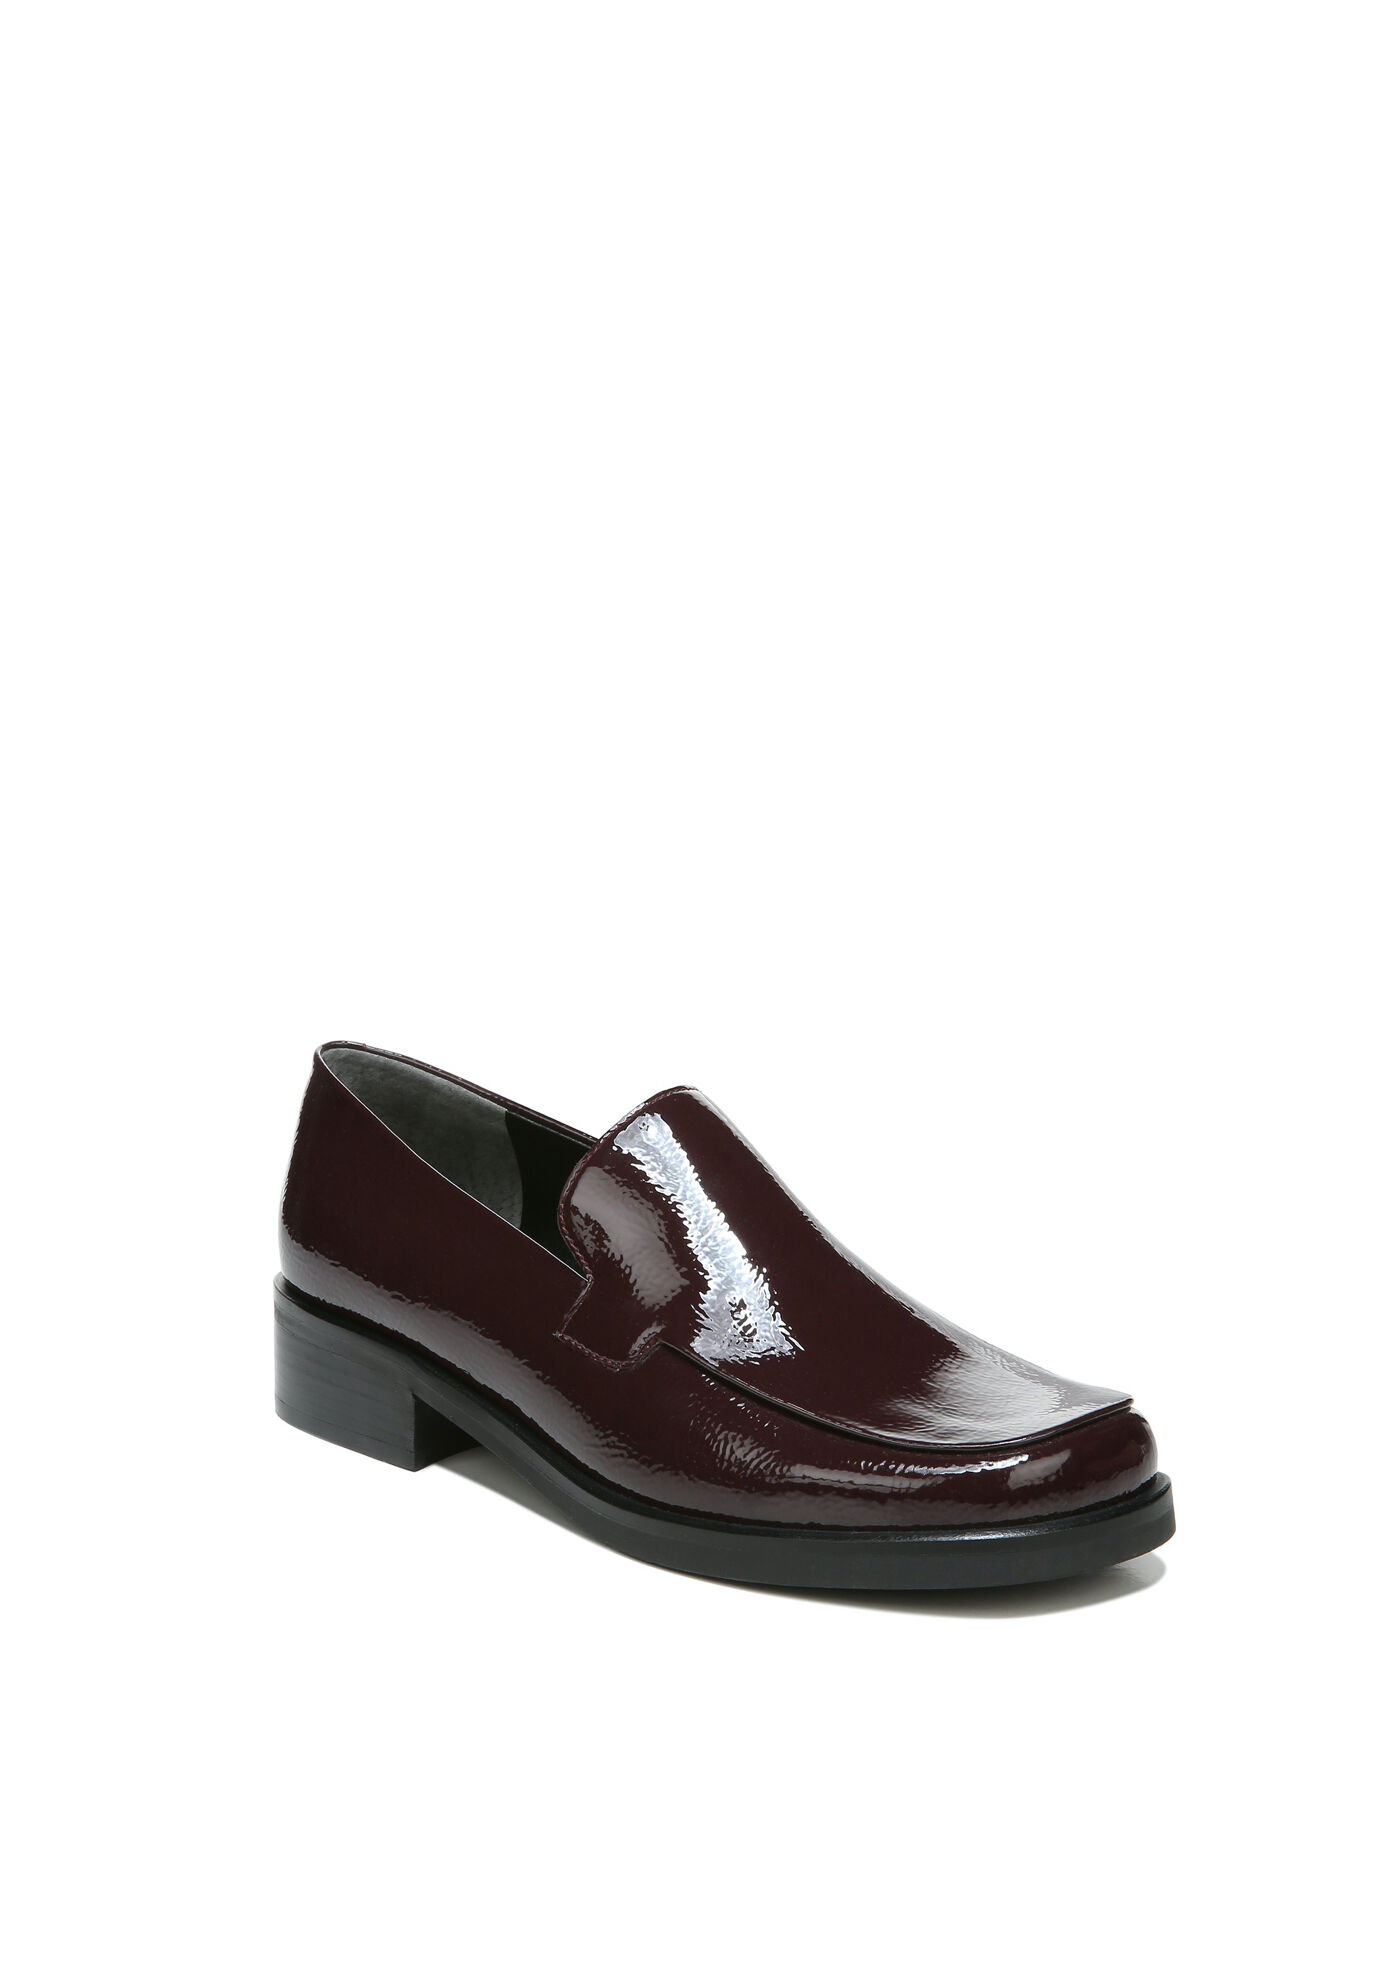 Women's Bocca Loafer by Franco Sarto in Deep Merlot (Size 6 1/2 M)